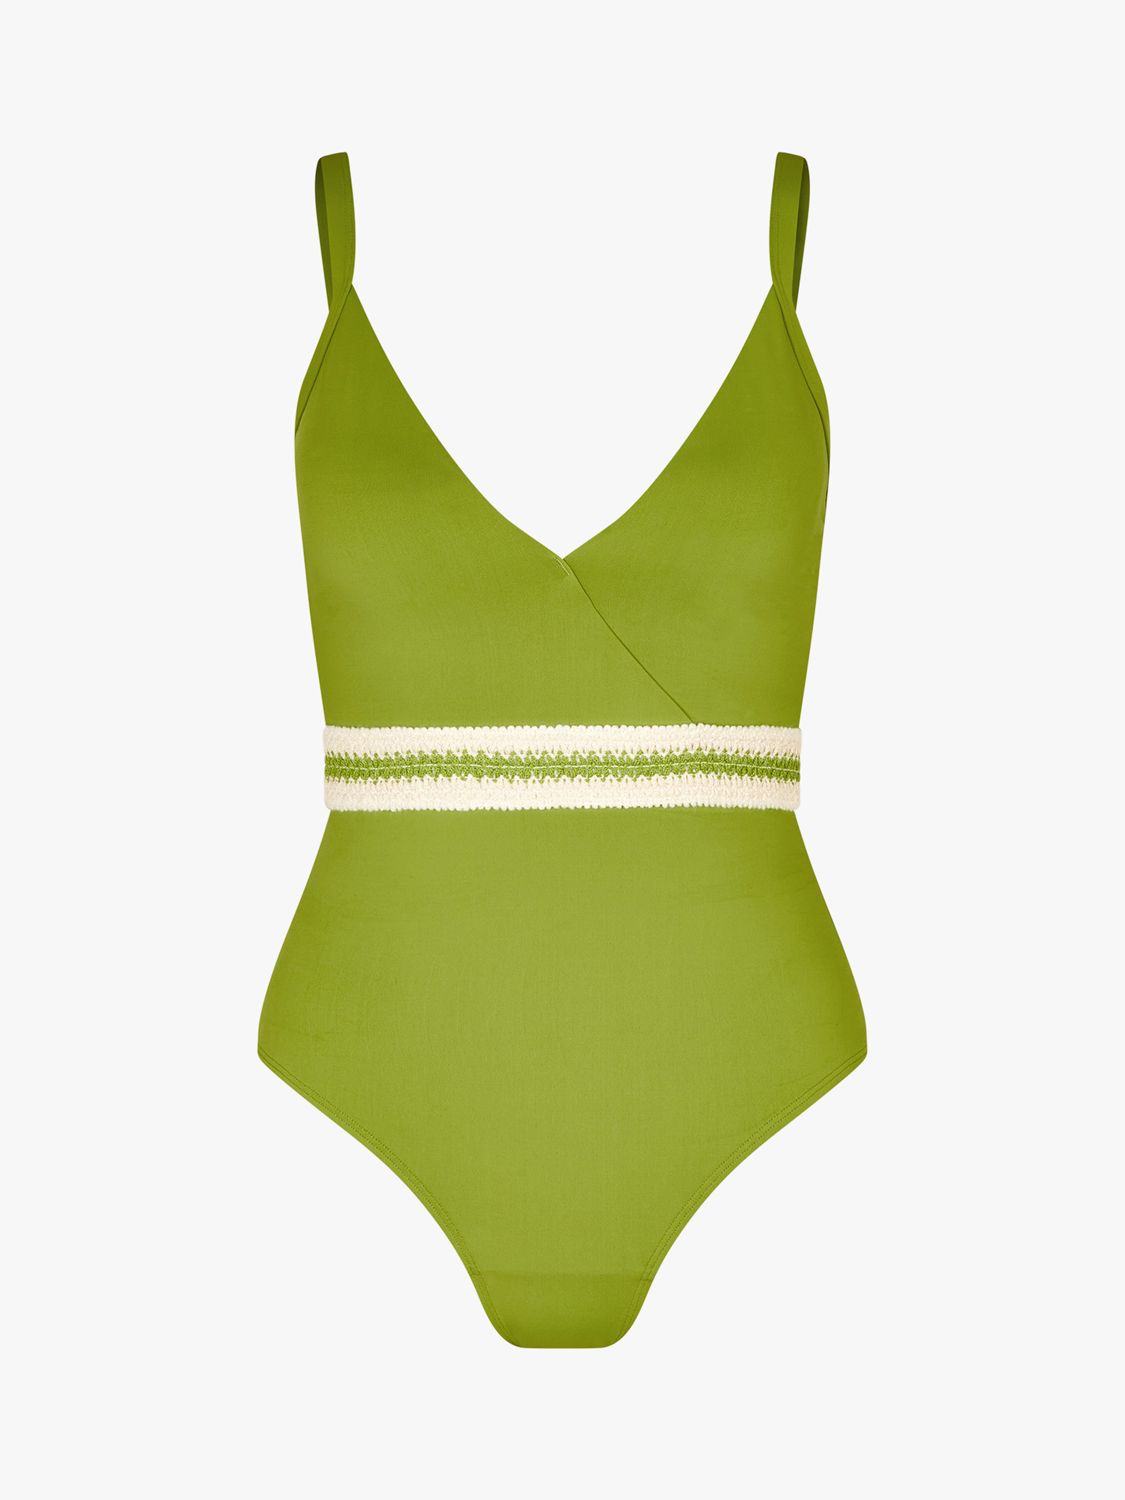 Accessorize Embroidered Waist Swimsuit, Olive Green, 6